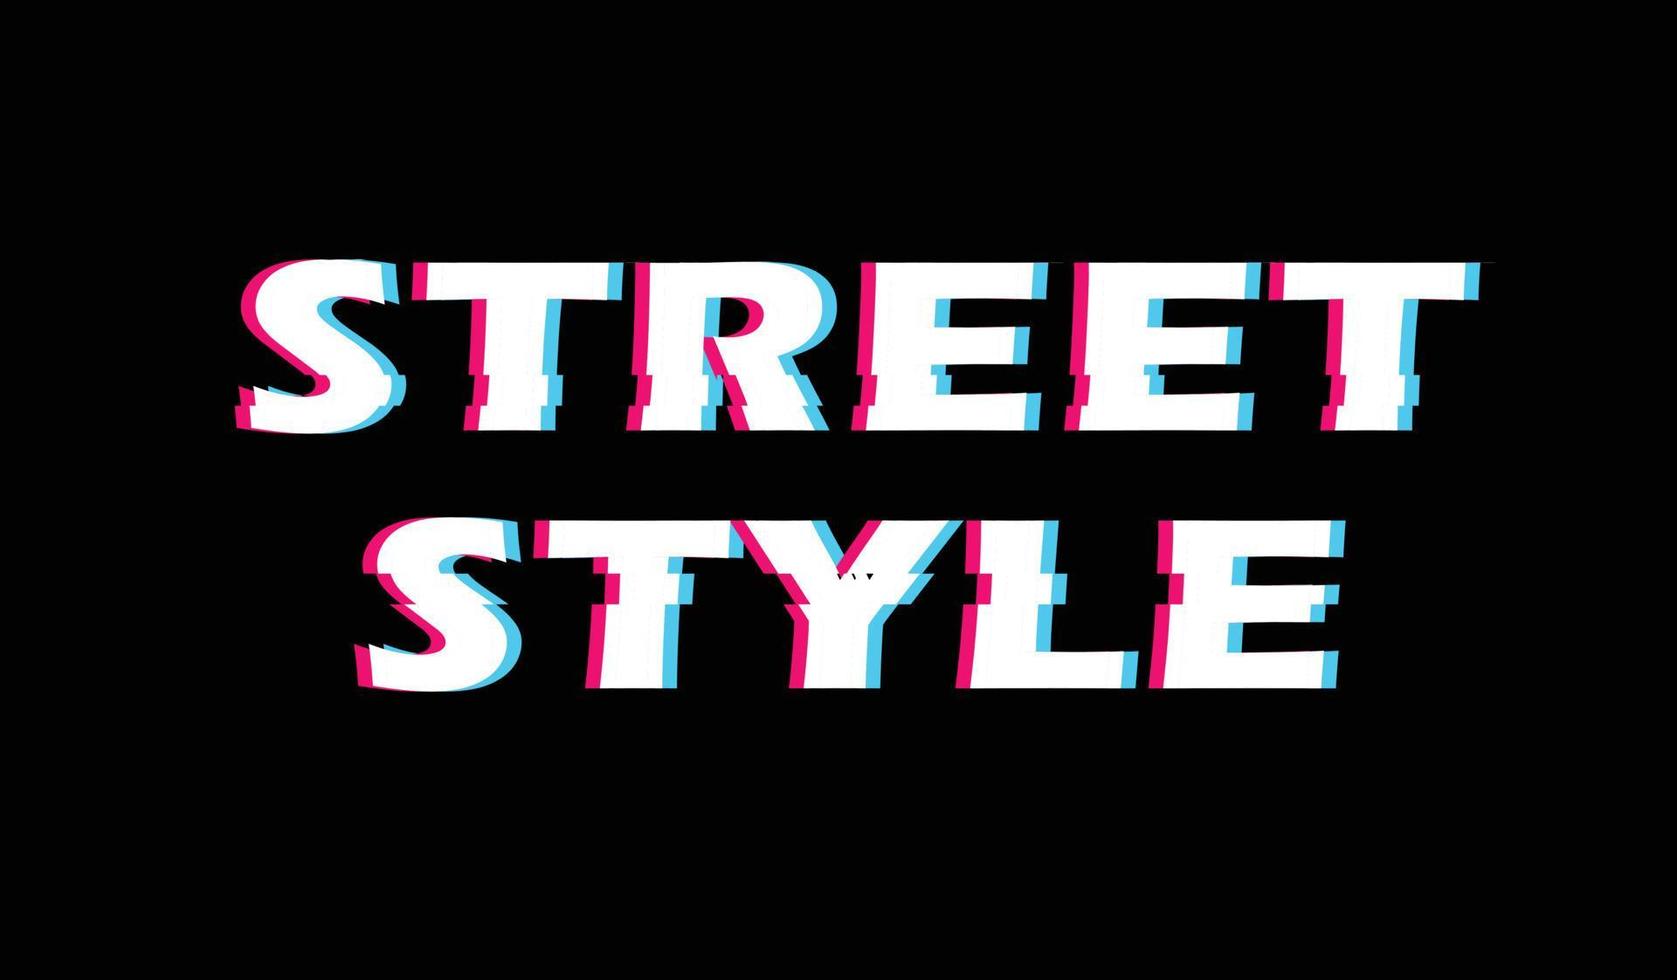 Text illustration for t-shirt or sticker. Street style vector